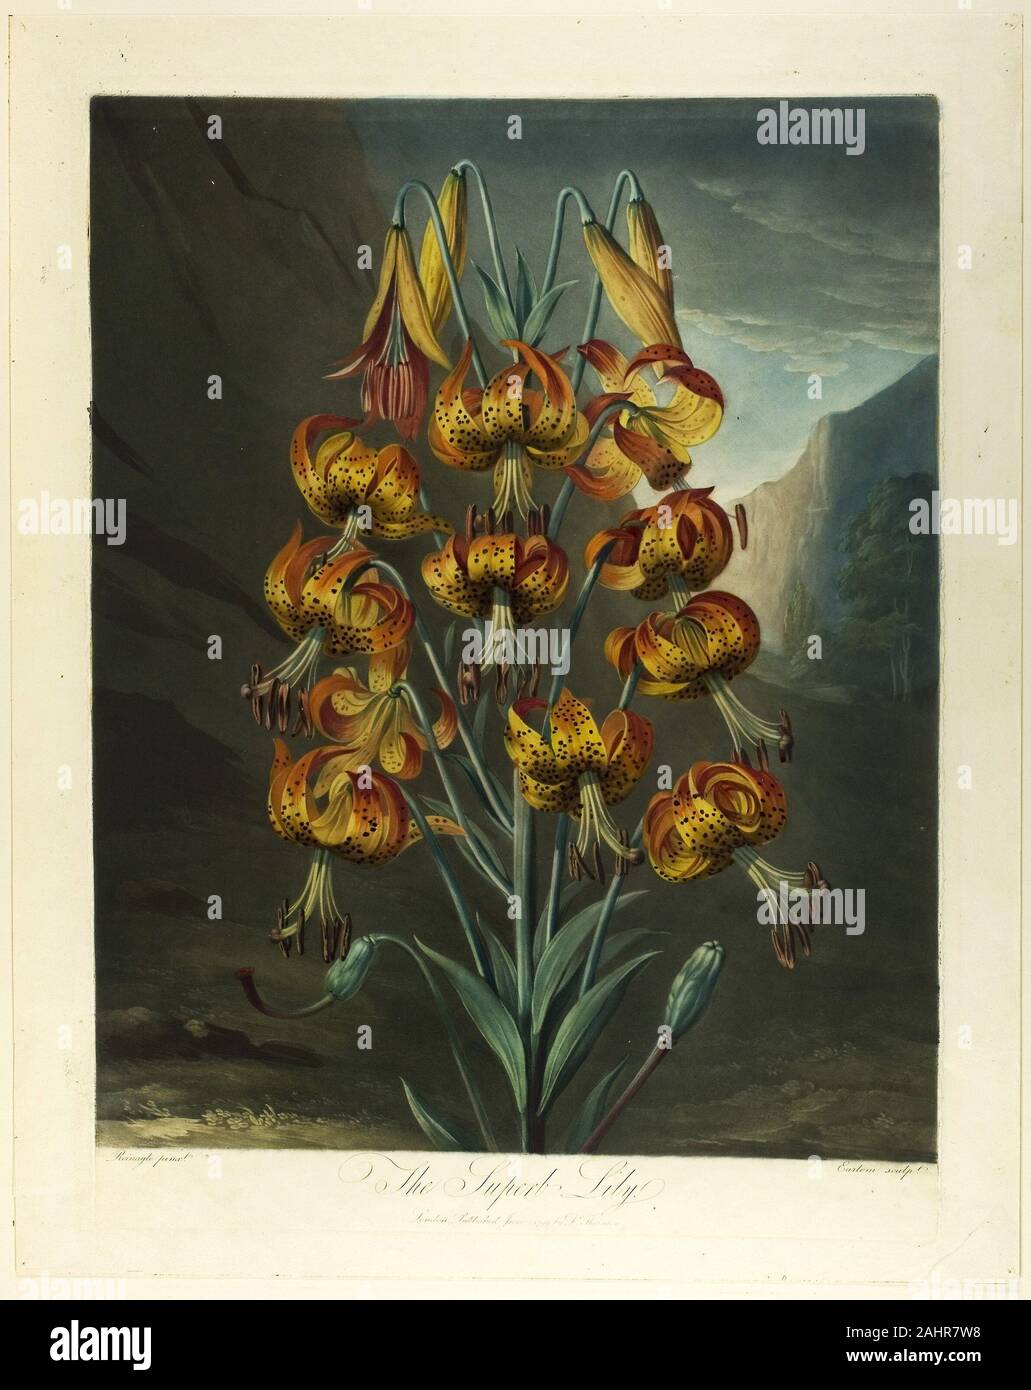 Richard Earlom. The Superb Lily, from The Temple of Flora. 1763–1822. England. Color mezzotint, aquatint and etching, inked à la poupée, with watercolor (hand-coloring) on cream wove paper The consummate mezzotint engraver Richard Earlom produced this large-scale mixed-media print of the Superb Lily (seen here in the second of four substantially different states) around 1799. The image was intended to be included in botanist Richard John Thornton’s grand publication of over life-sized prints of 70 species of flora, celebrating Carl Linnaeus’s 1735 classification system. By 1810, Thornton issue Stock Photo